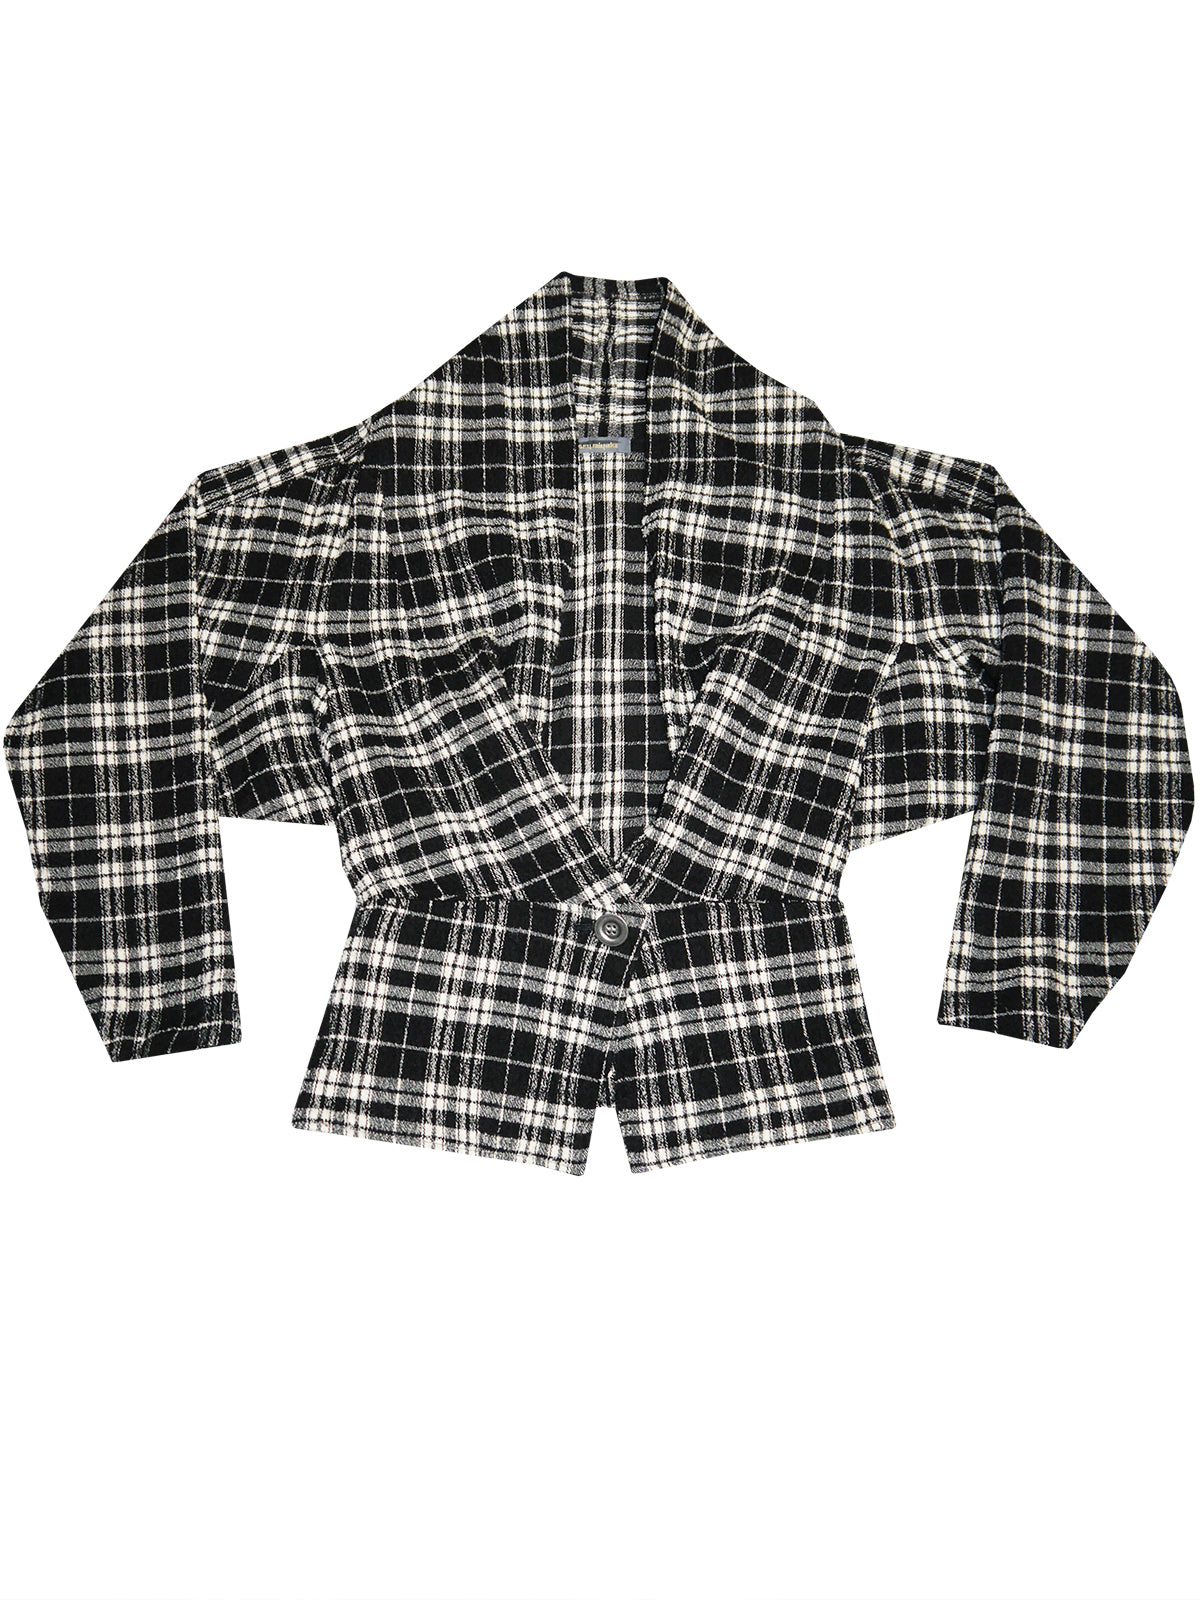 ISSEY MIYAKE Fall 1987 Documented Plaid Jacket w/ Twisted Collar Size S